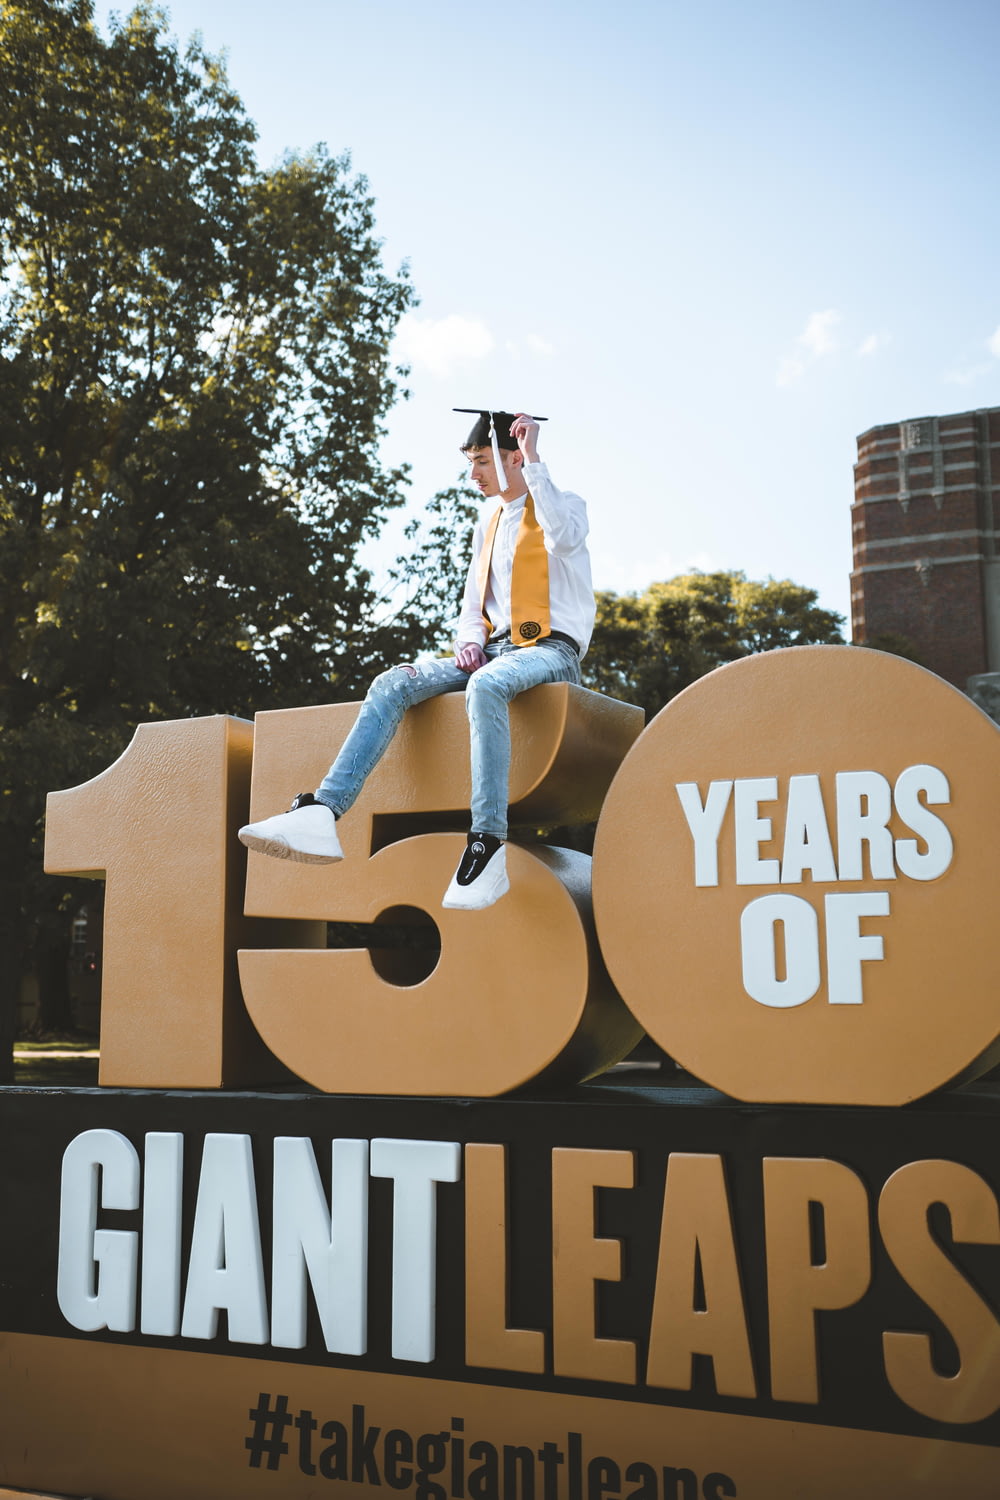 man with black mortar board sitting on 150 years giant leaps building